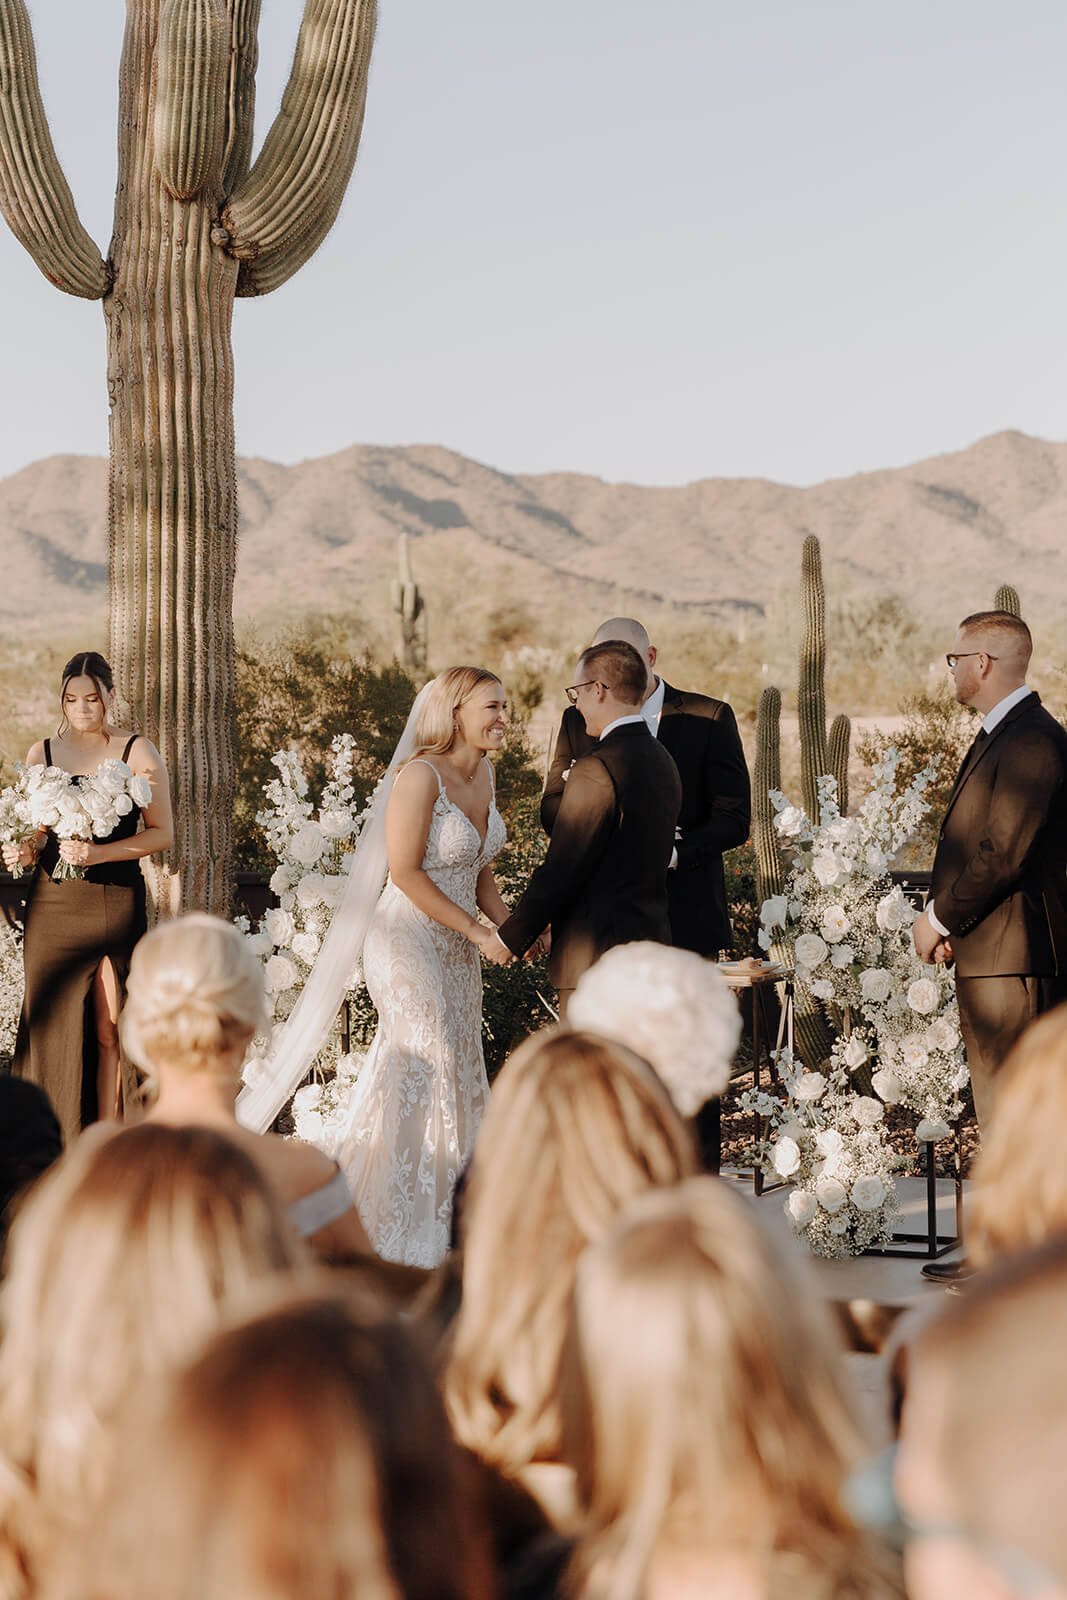 Bride and groom during ceremony outdoors at Arizona destination wedding